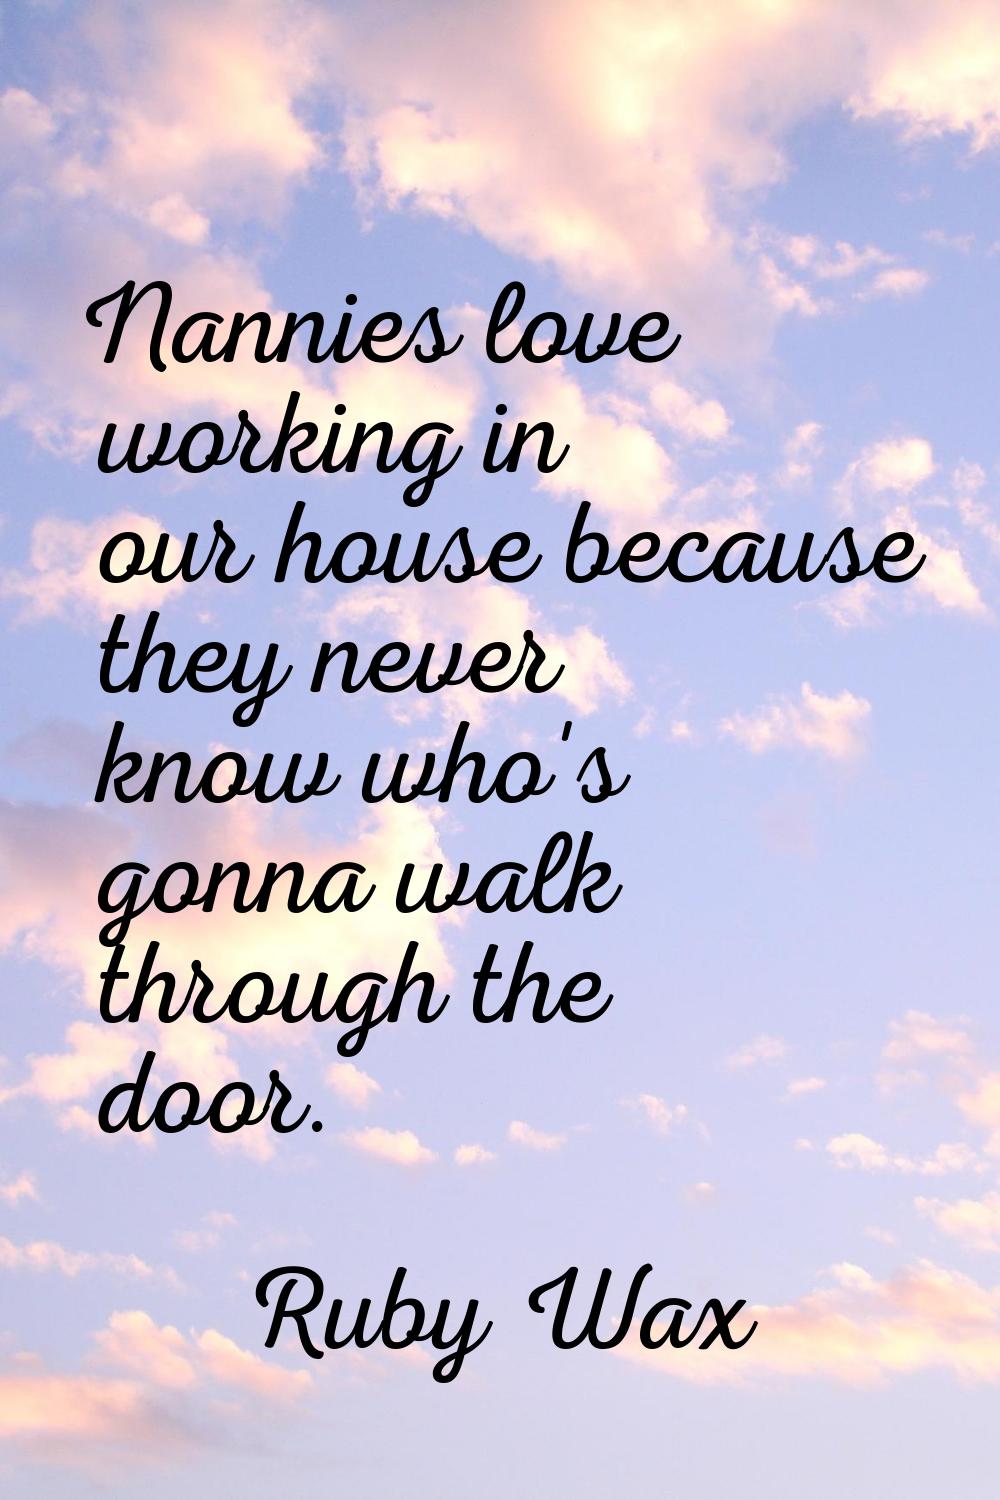 Nannies love working in our house because they never know who's gonna walk through the door.